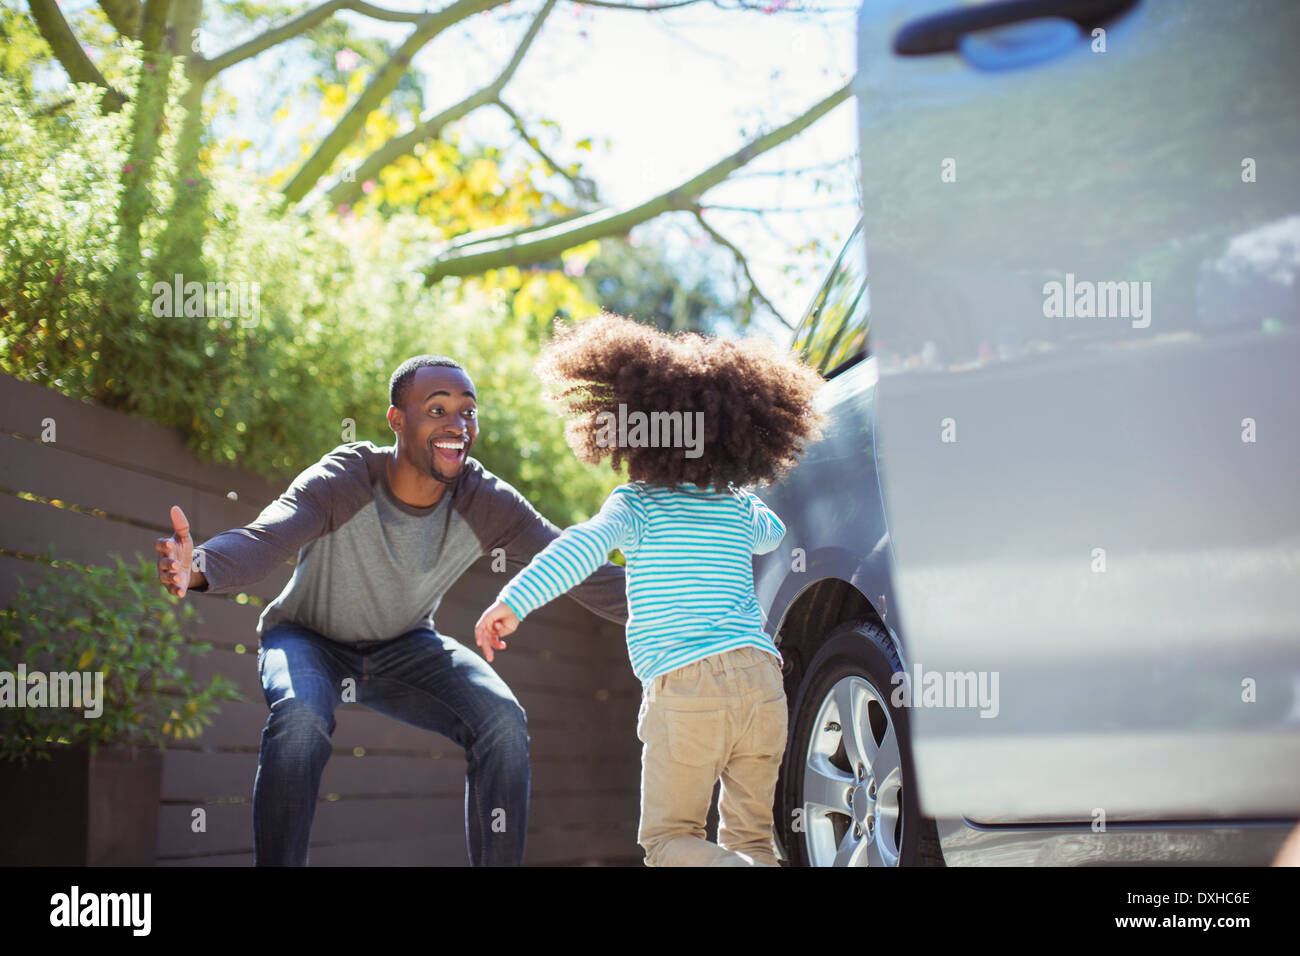 Enthusiastic father greeting daughter outside car Stock Photo